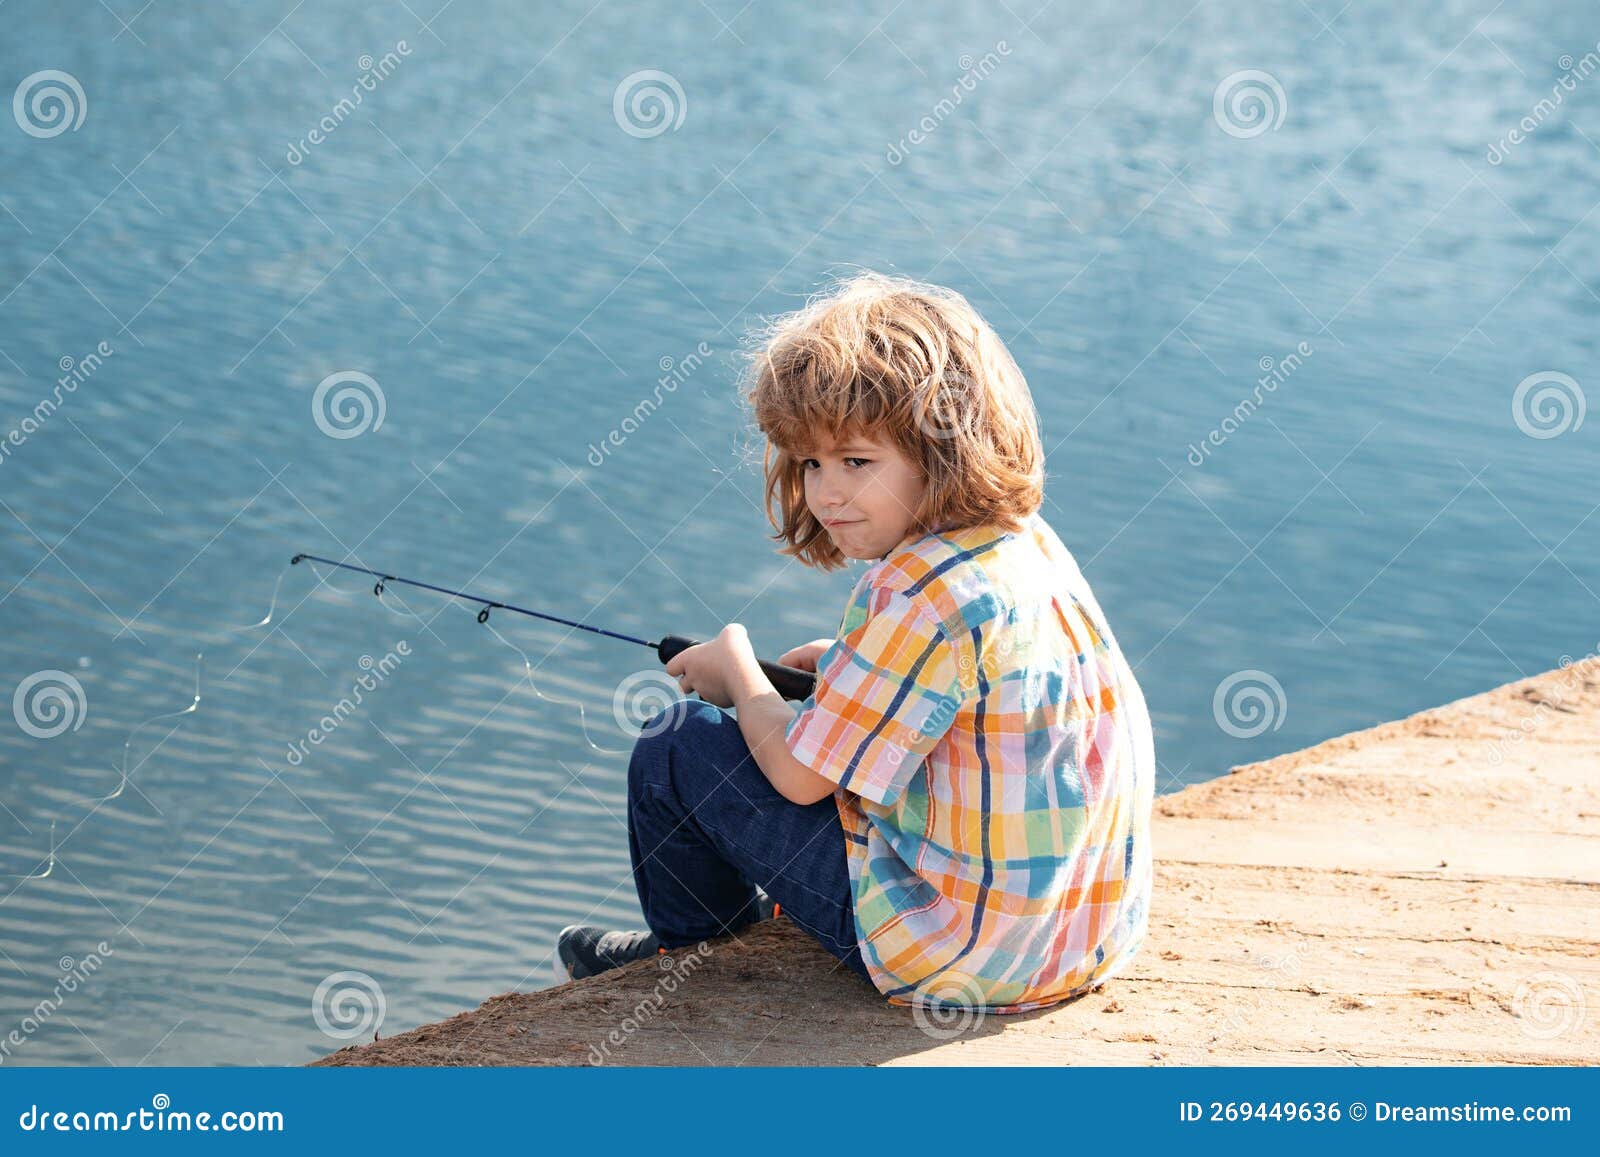 Kid Boy Fishing on the Lake. Young Fisher. Boy with Spinner at